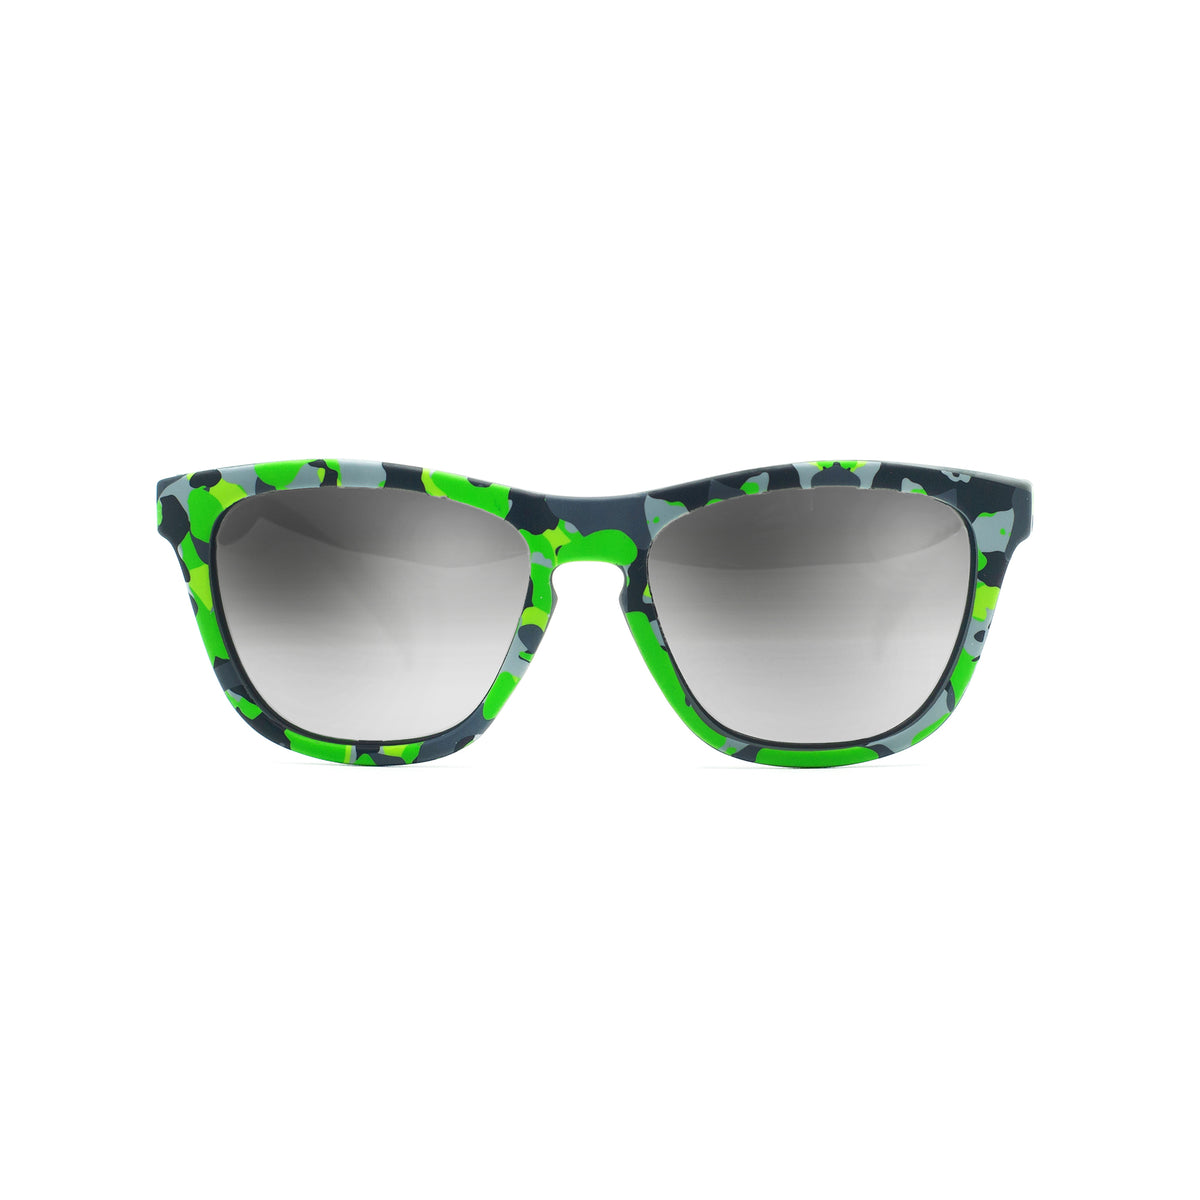 Front view of kids polarized sunglasses in a green camo print